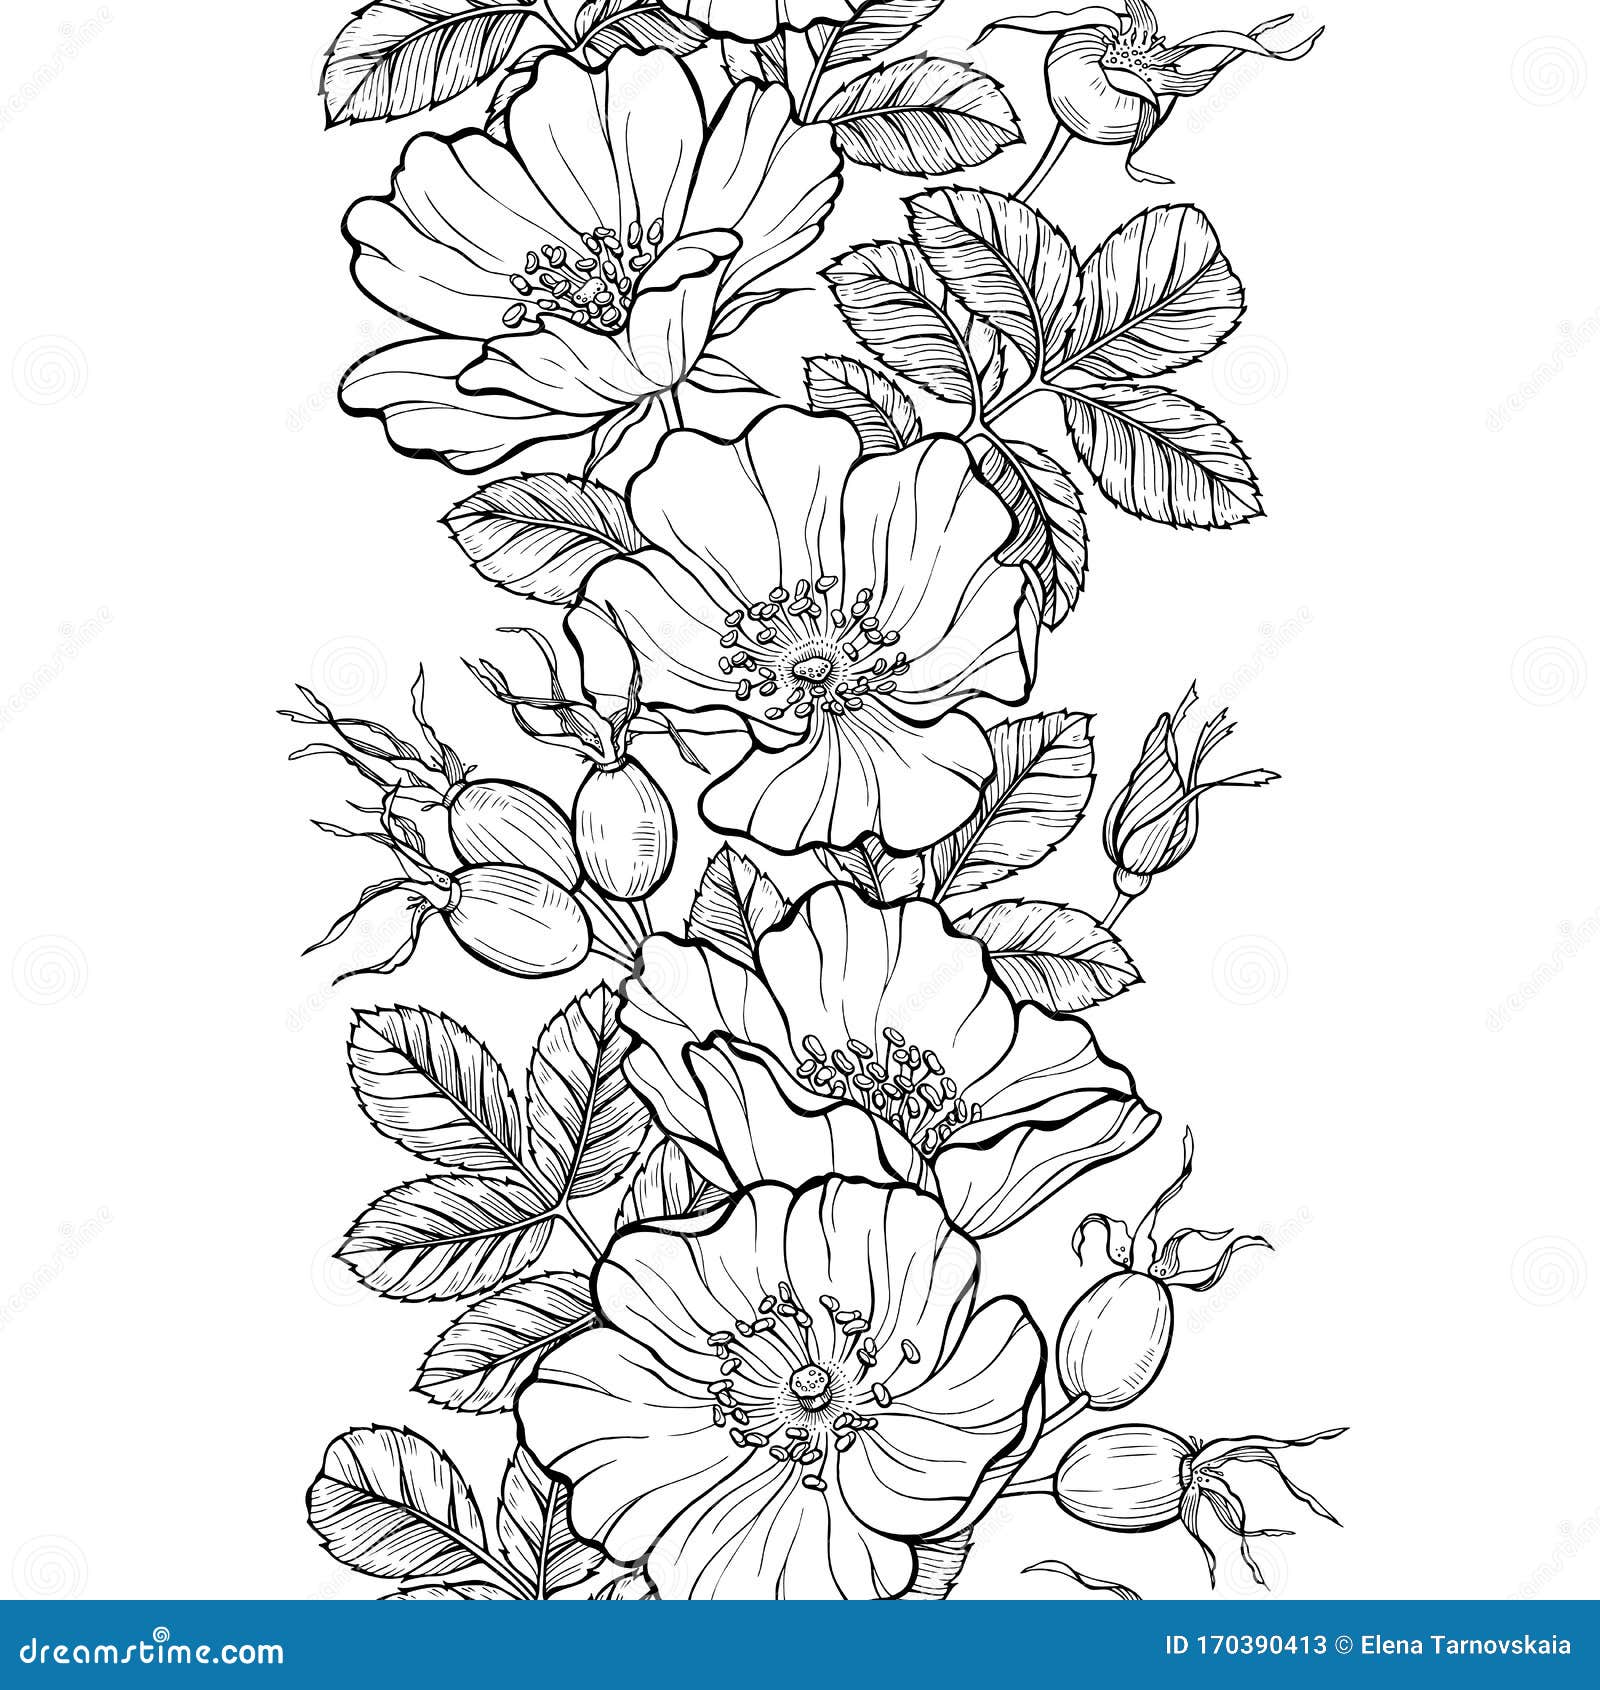 How to Draw a Floral Design - Really Easy Drawing Tutorial-saigonsouth.com.vn